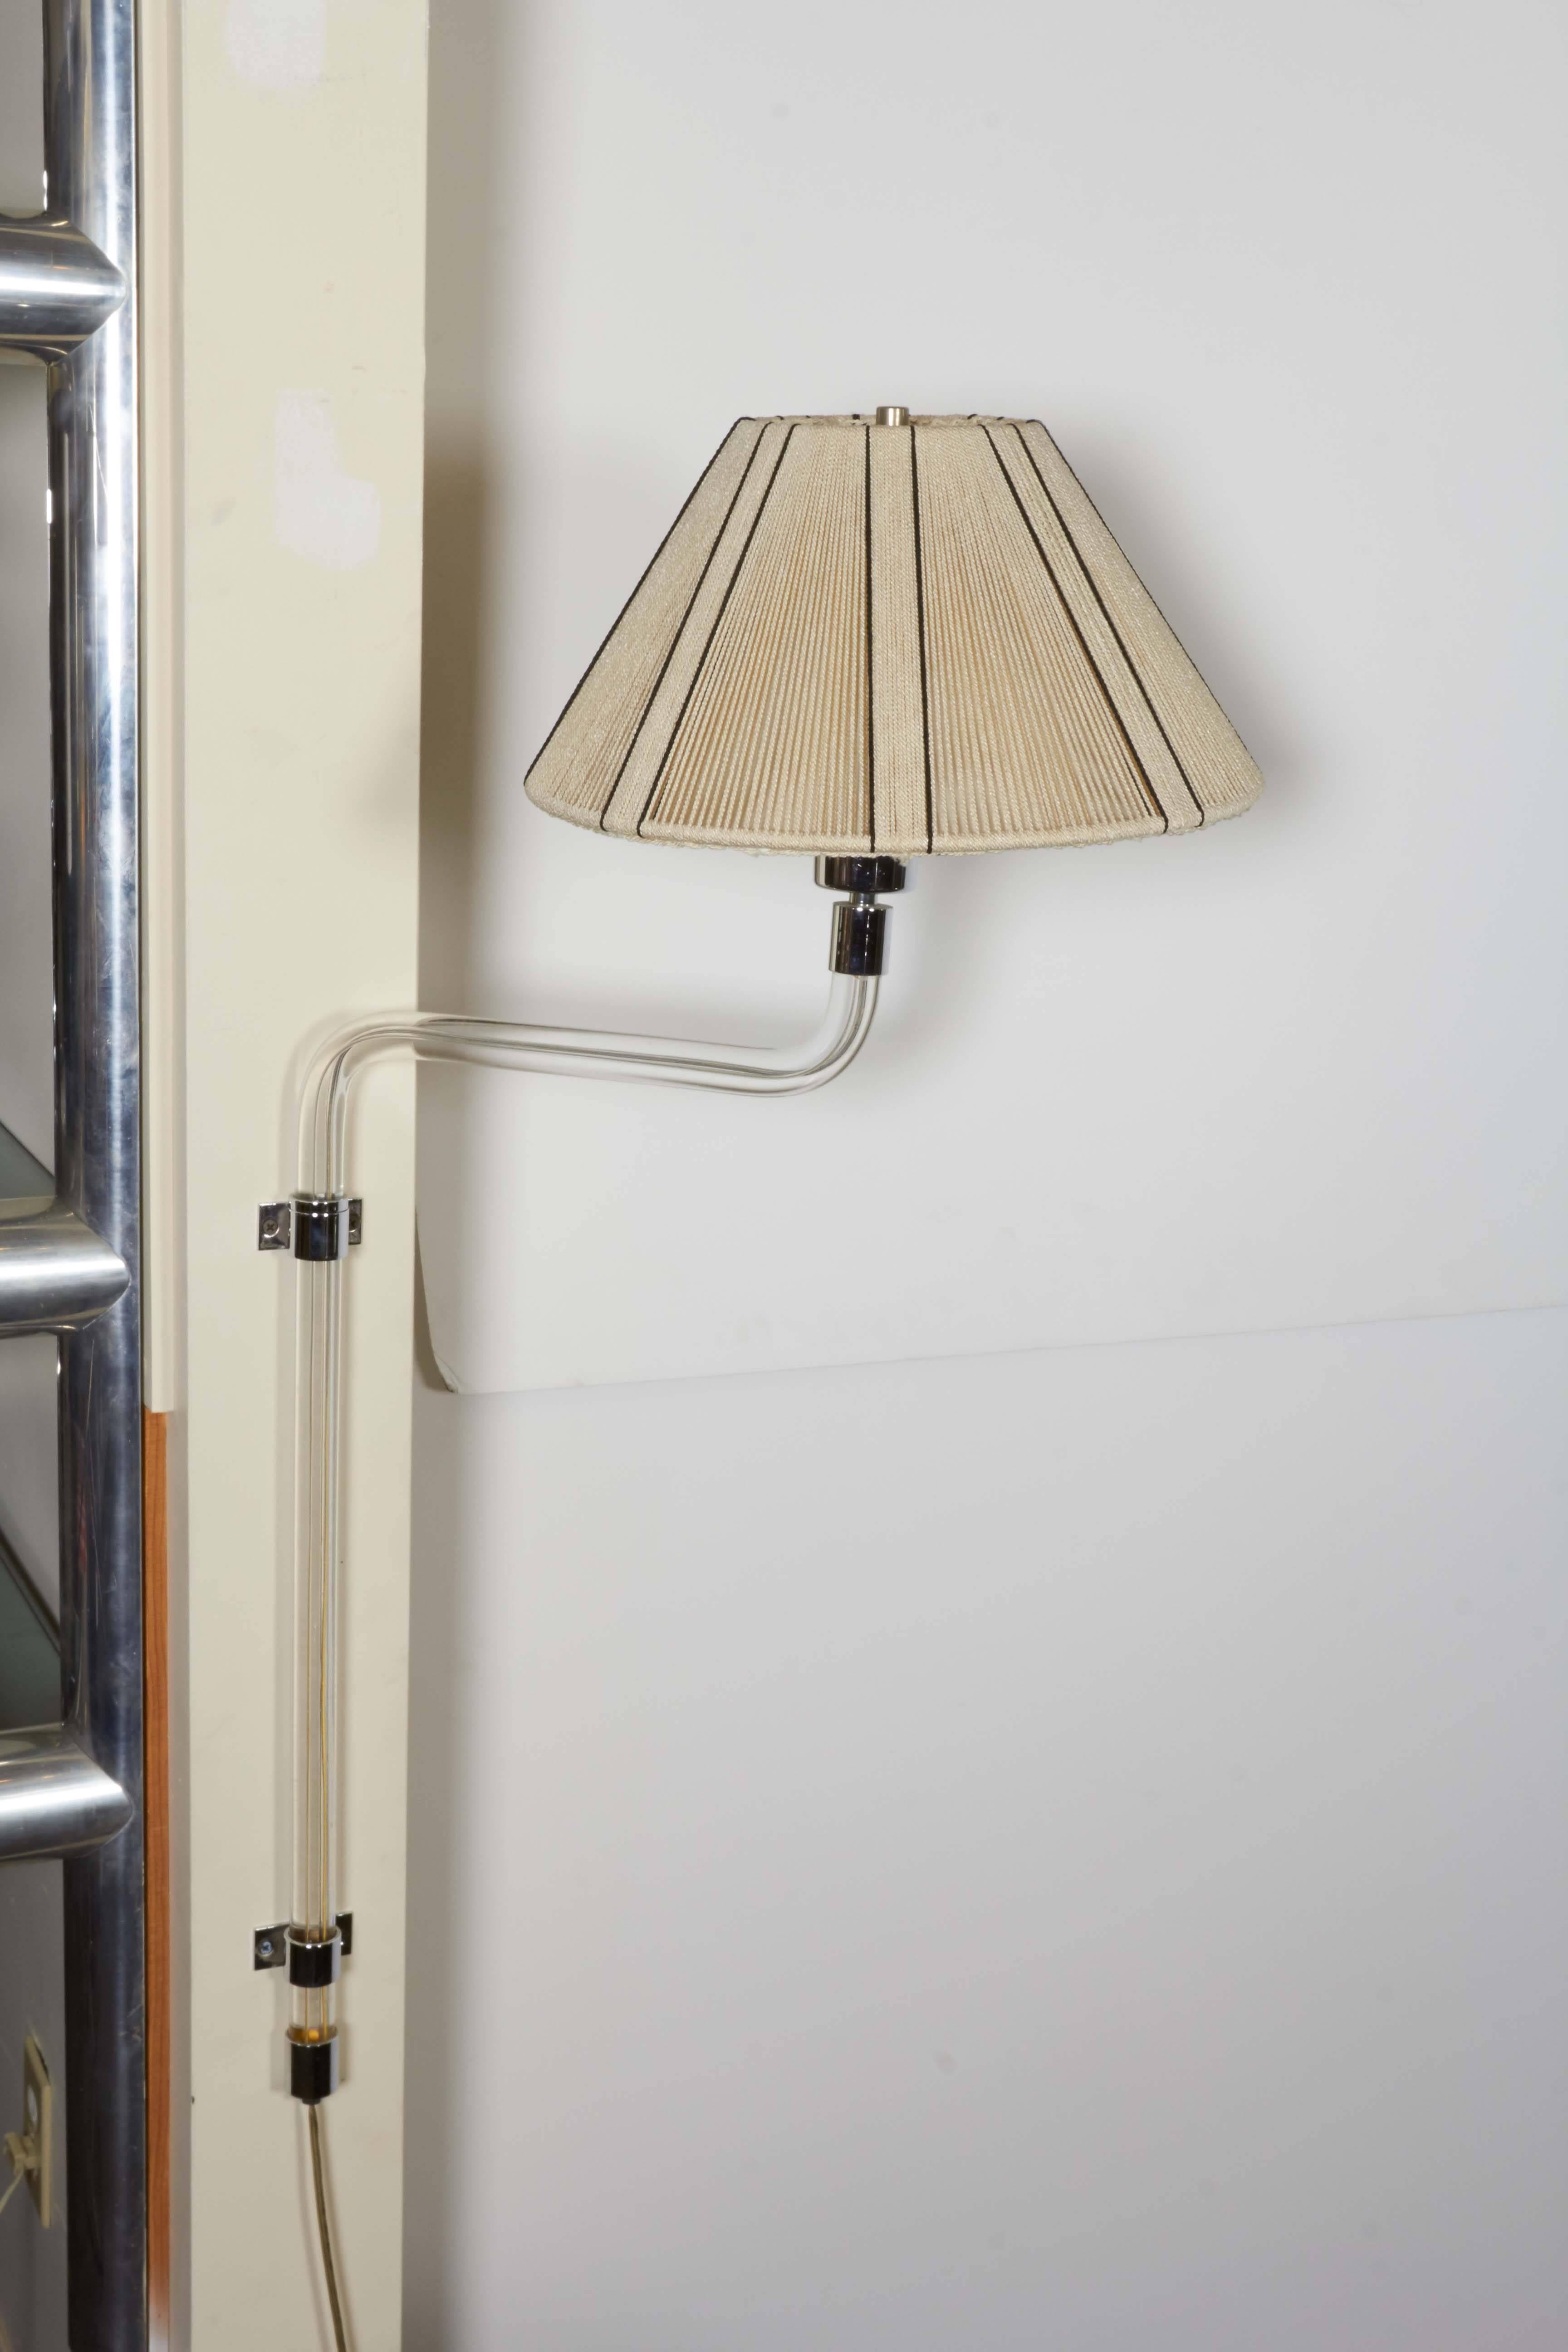 A swing wall light by designer Peter Hamburger, manufactured circa 1960s-1970s by Knoll, the curved stem comprised of Lucite, accented in chrome, including original string shade. Excellent vintage condition, consistent with age and use.

10819